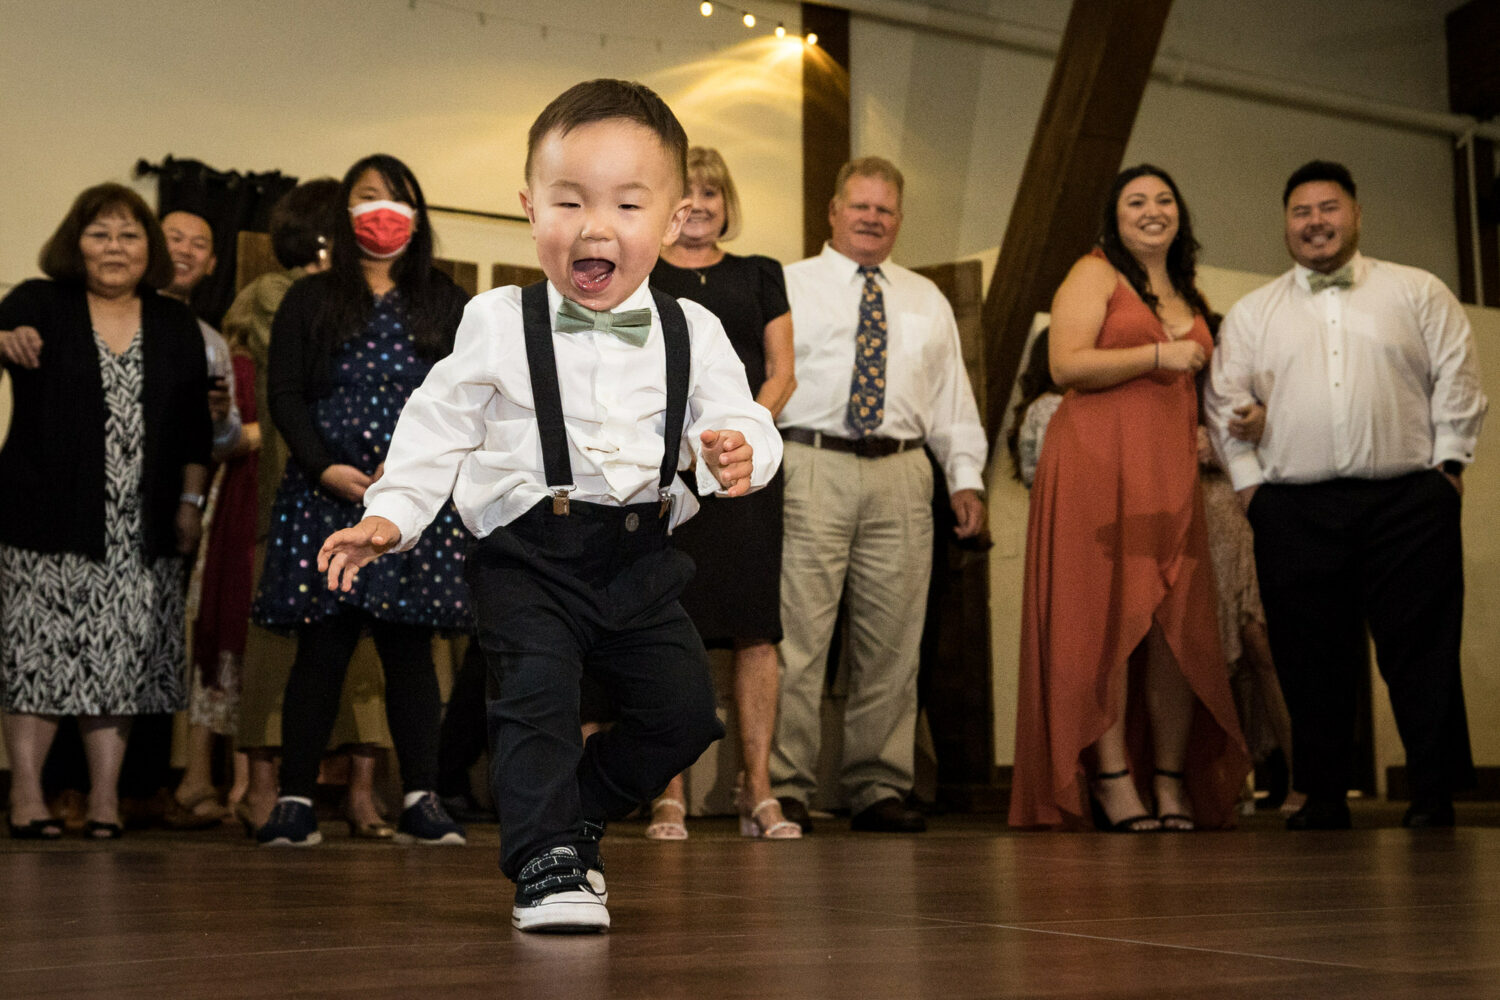 A cute toddler hits the dance floor as wedding guests look on.